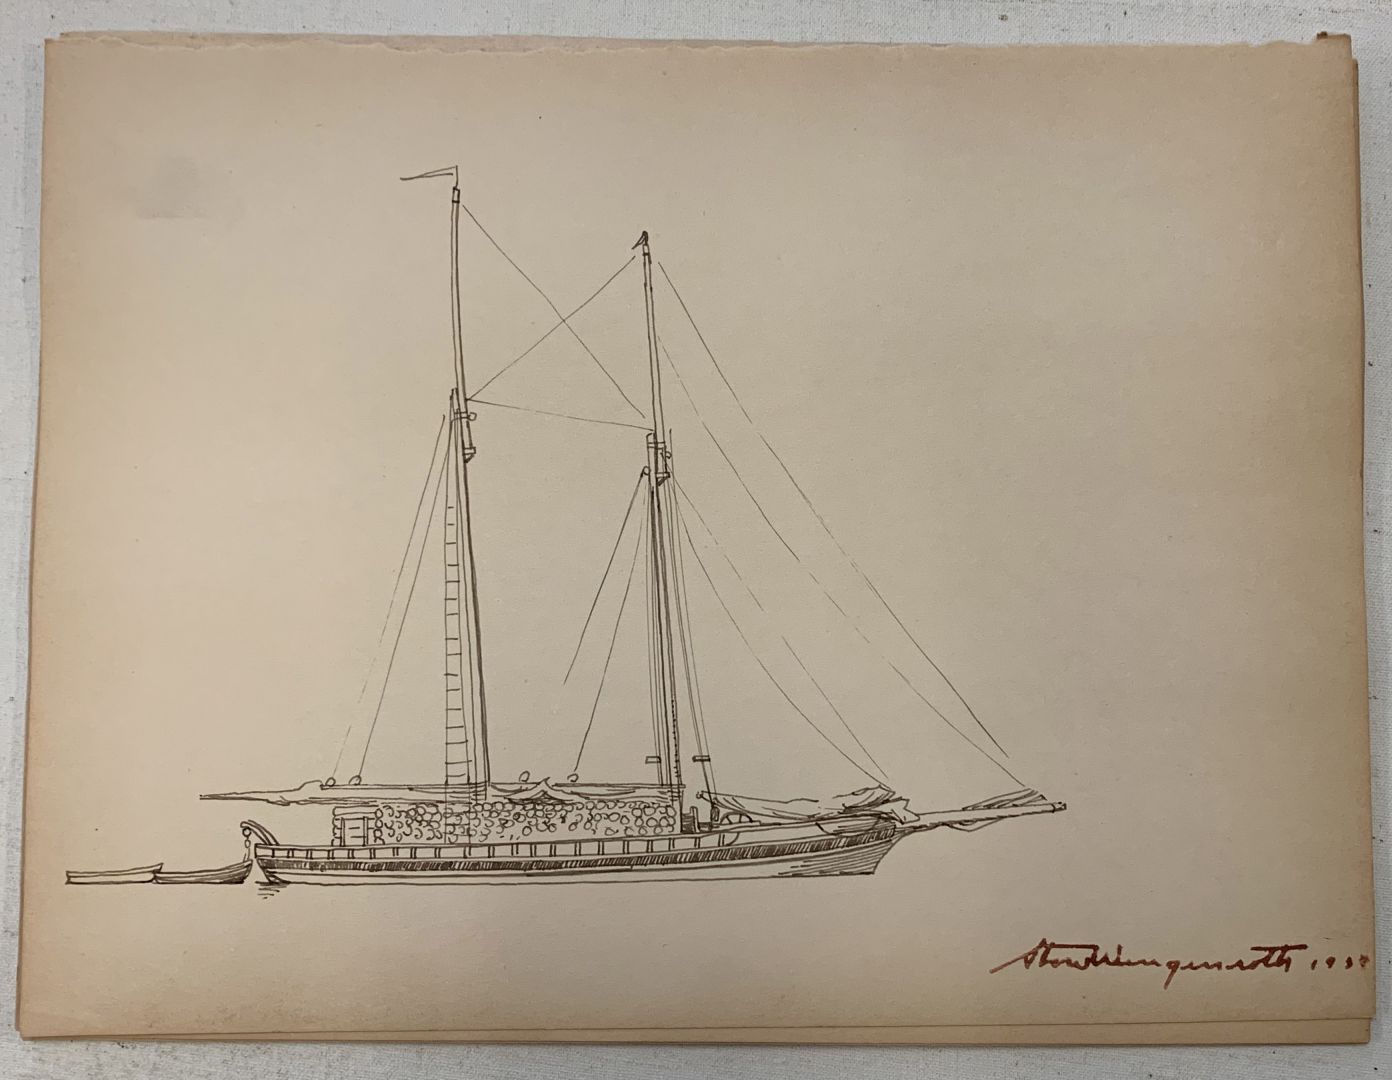 DRAWING OF A BOAT-LIKELY PORT CLYDE, ME